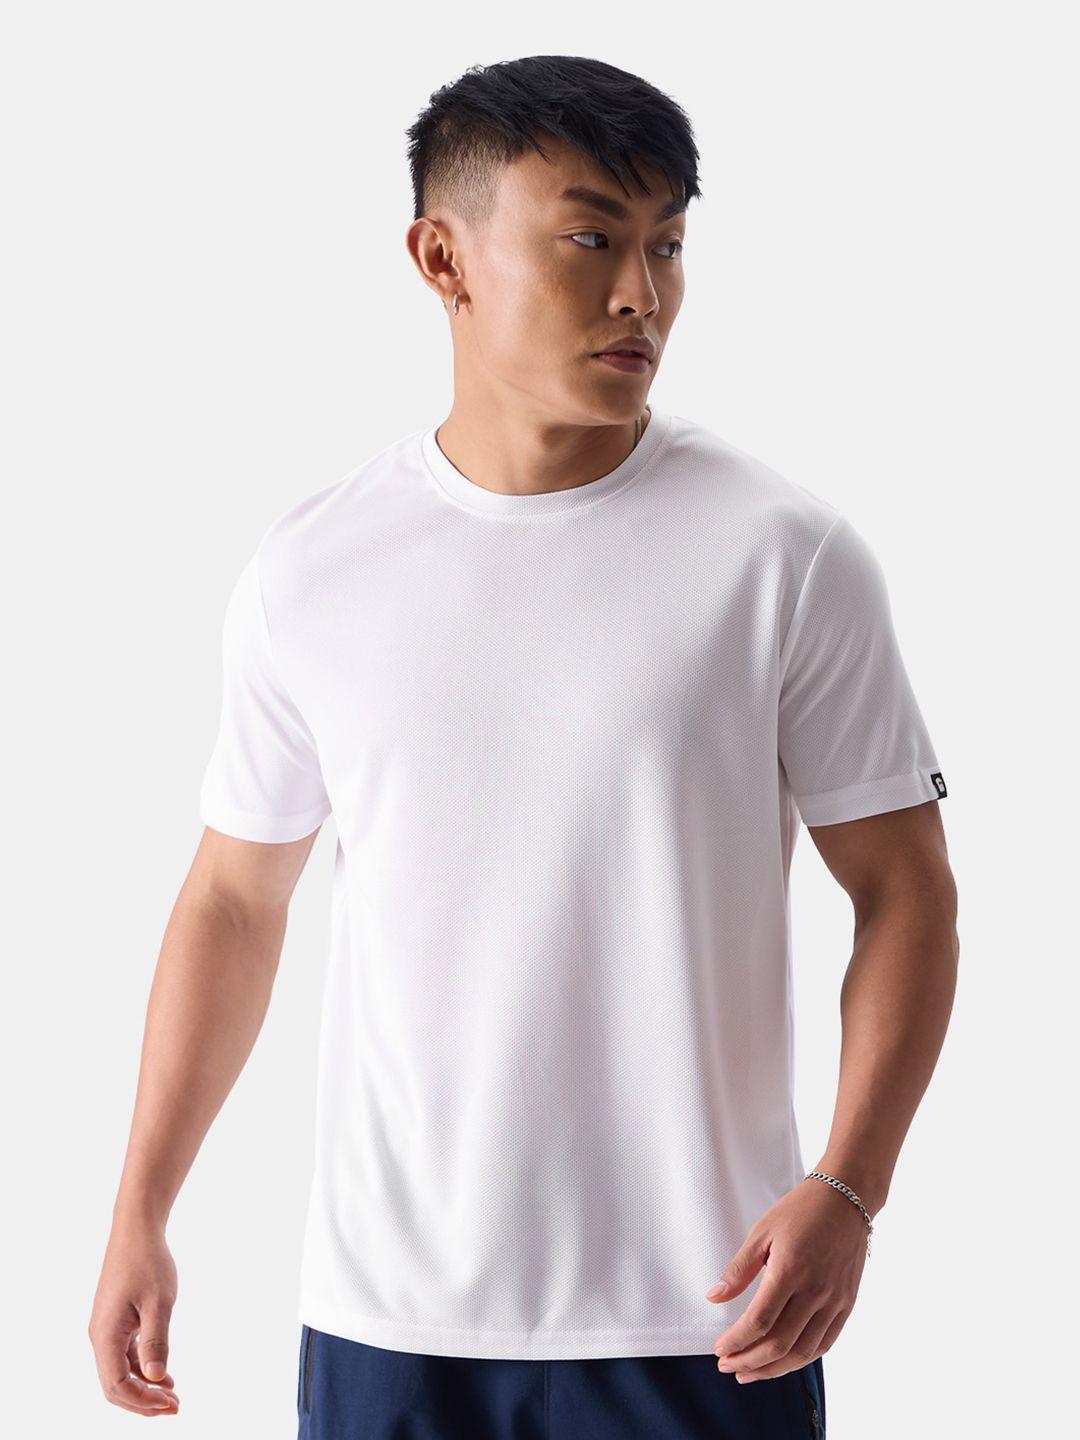 the-souled-store-white-round-neck-t-shirt